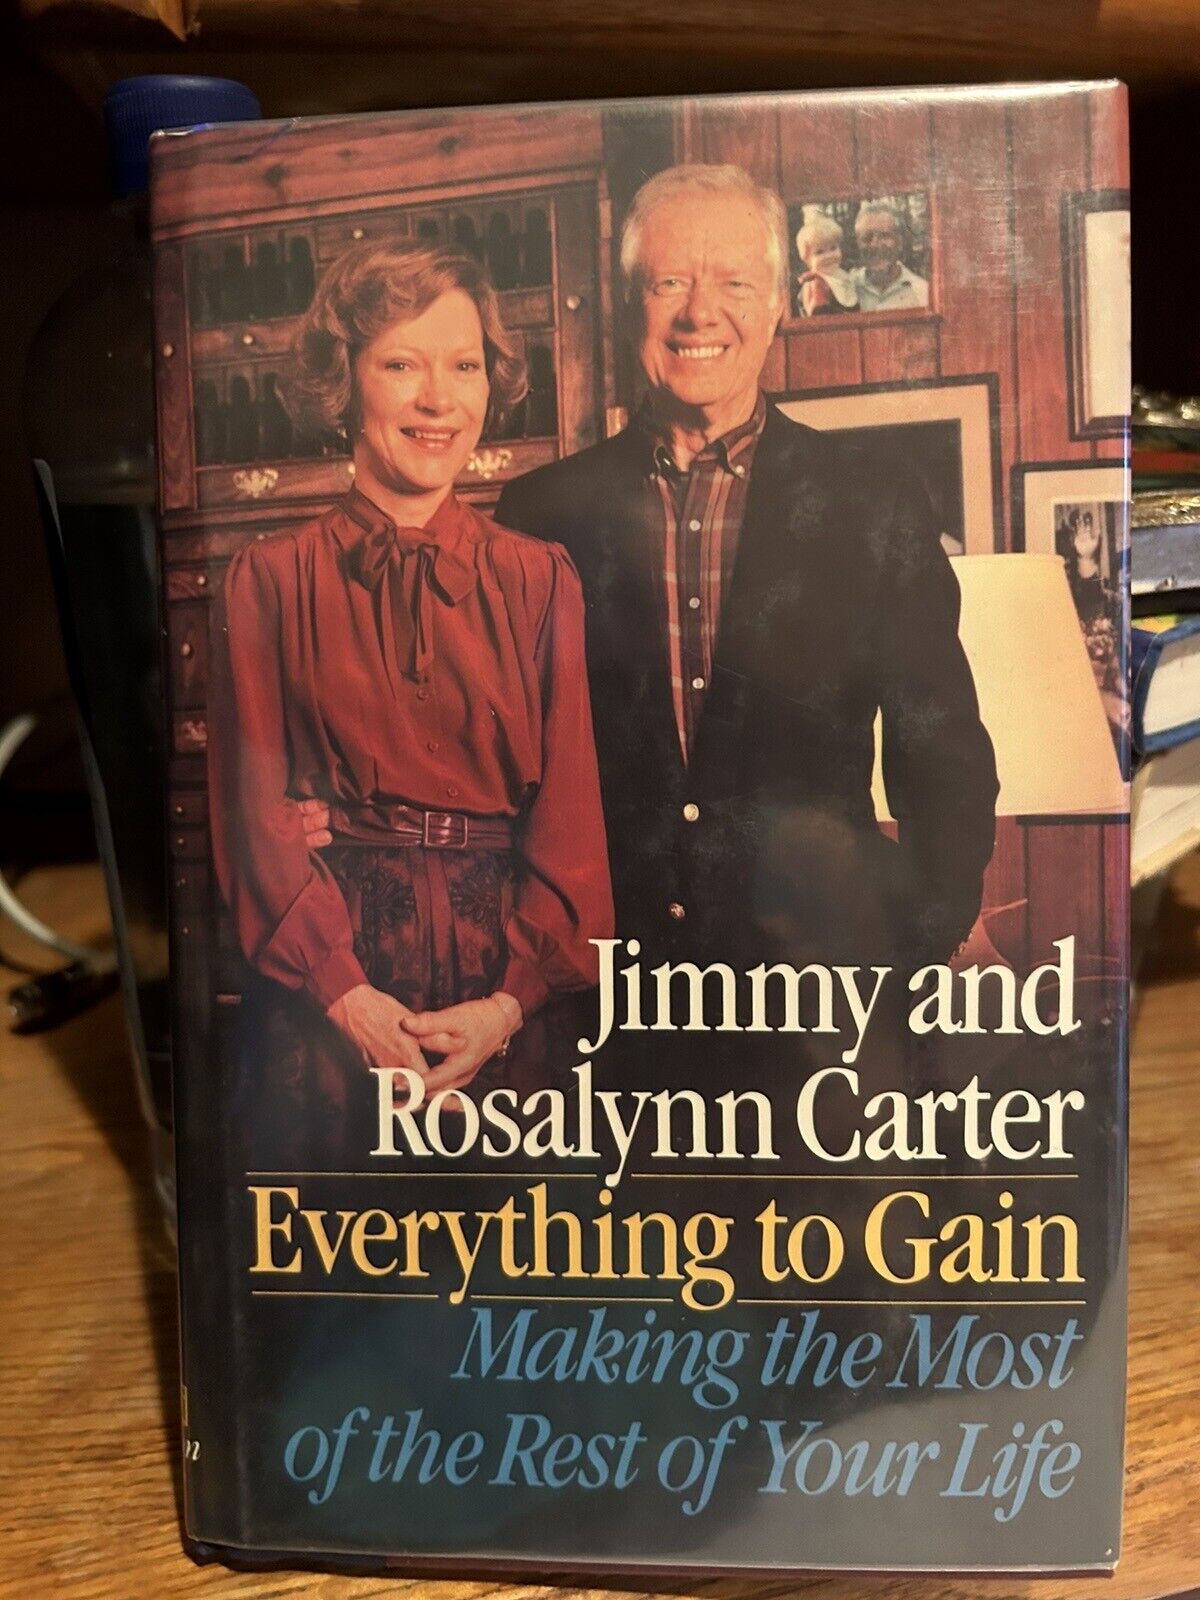 signed 1st edition autographed by Jimmy and Rosalyn Carter both signatures